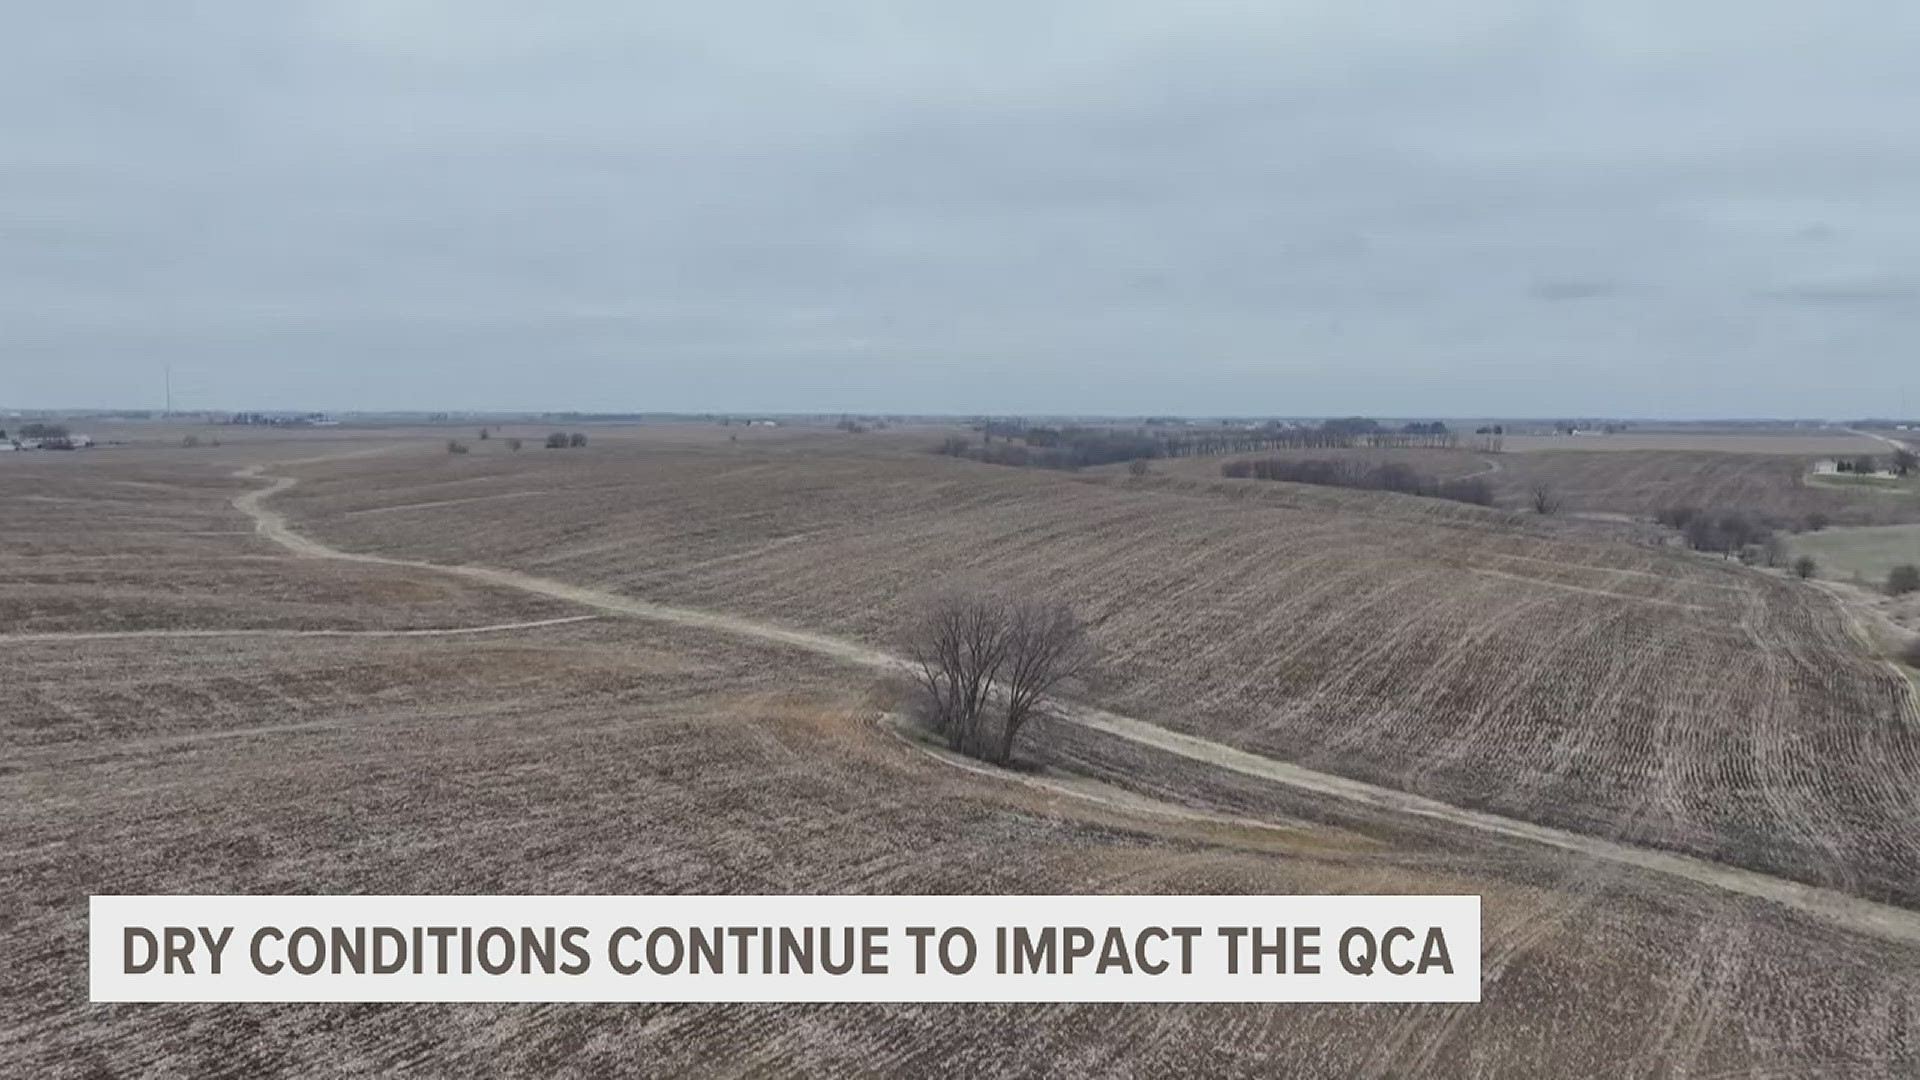 Tim Hall, the Iowa DNR's Hydrology Resources Coordinator, stopped by The Current to break down the impact of the drought in our local community.